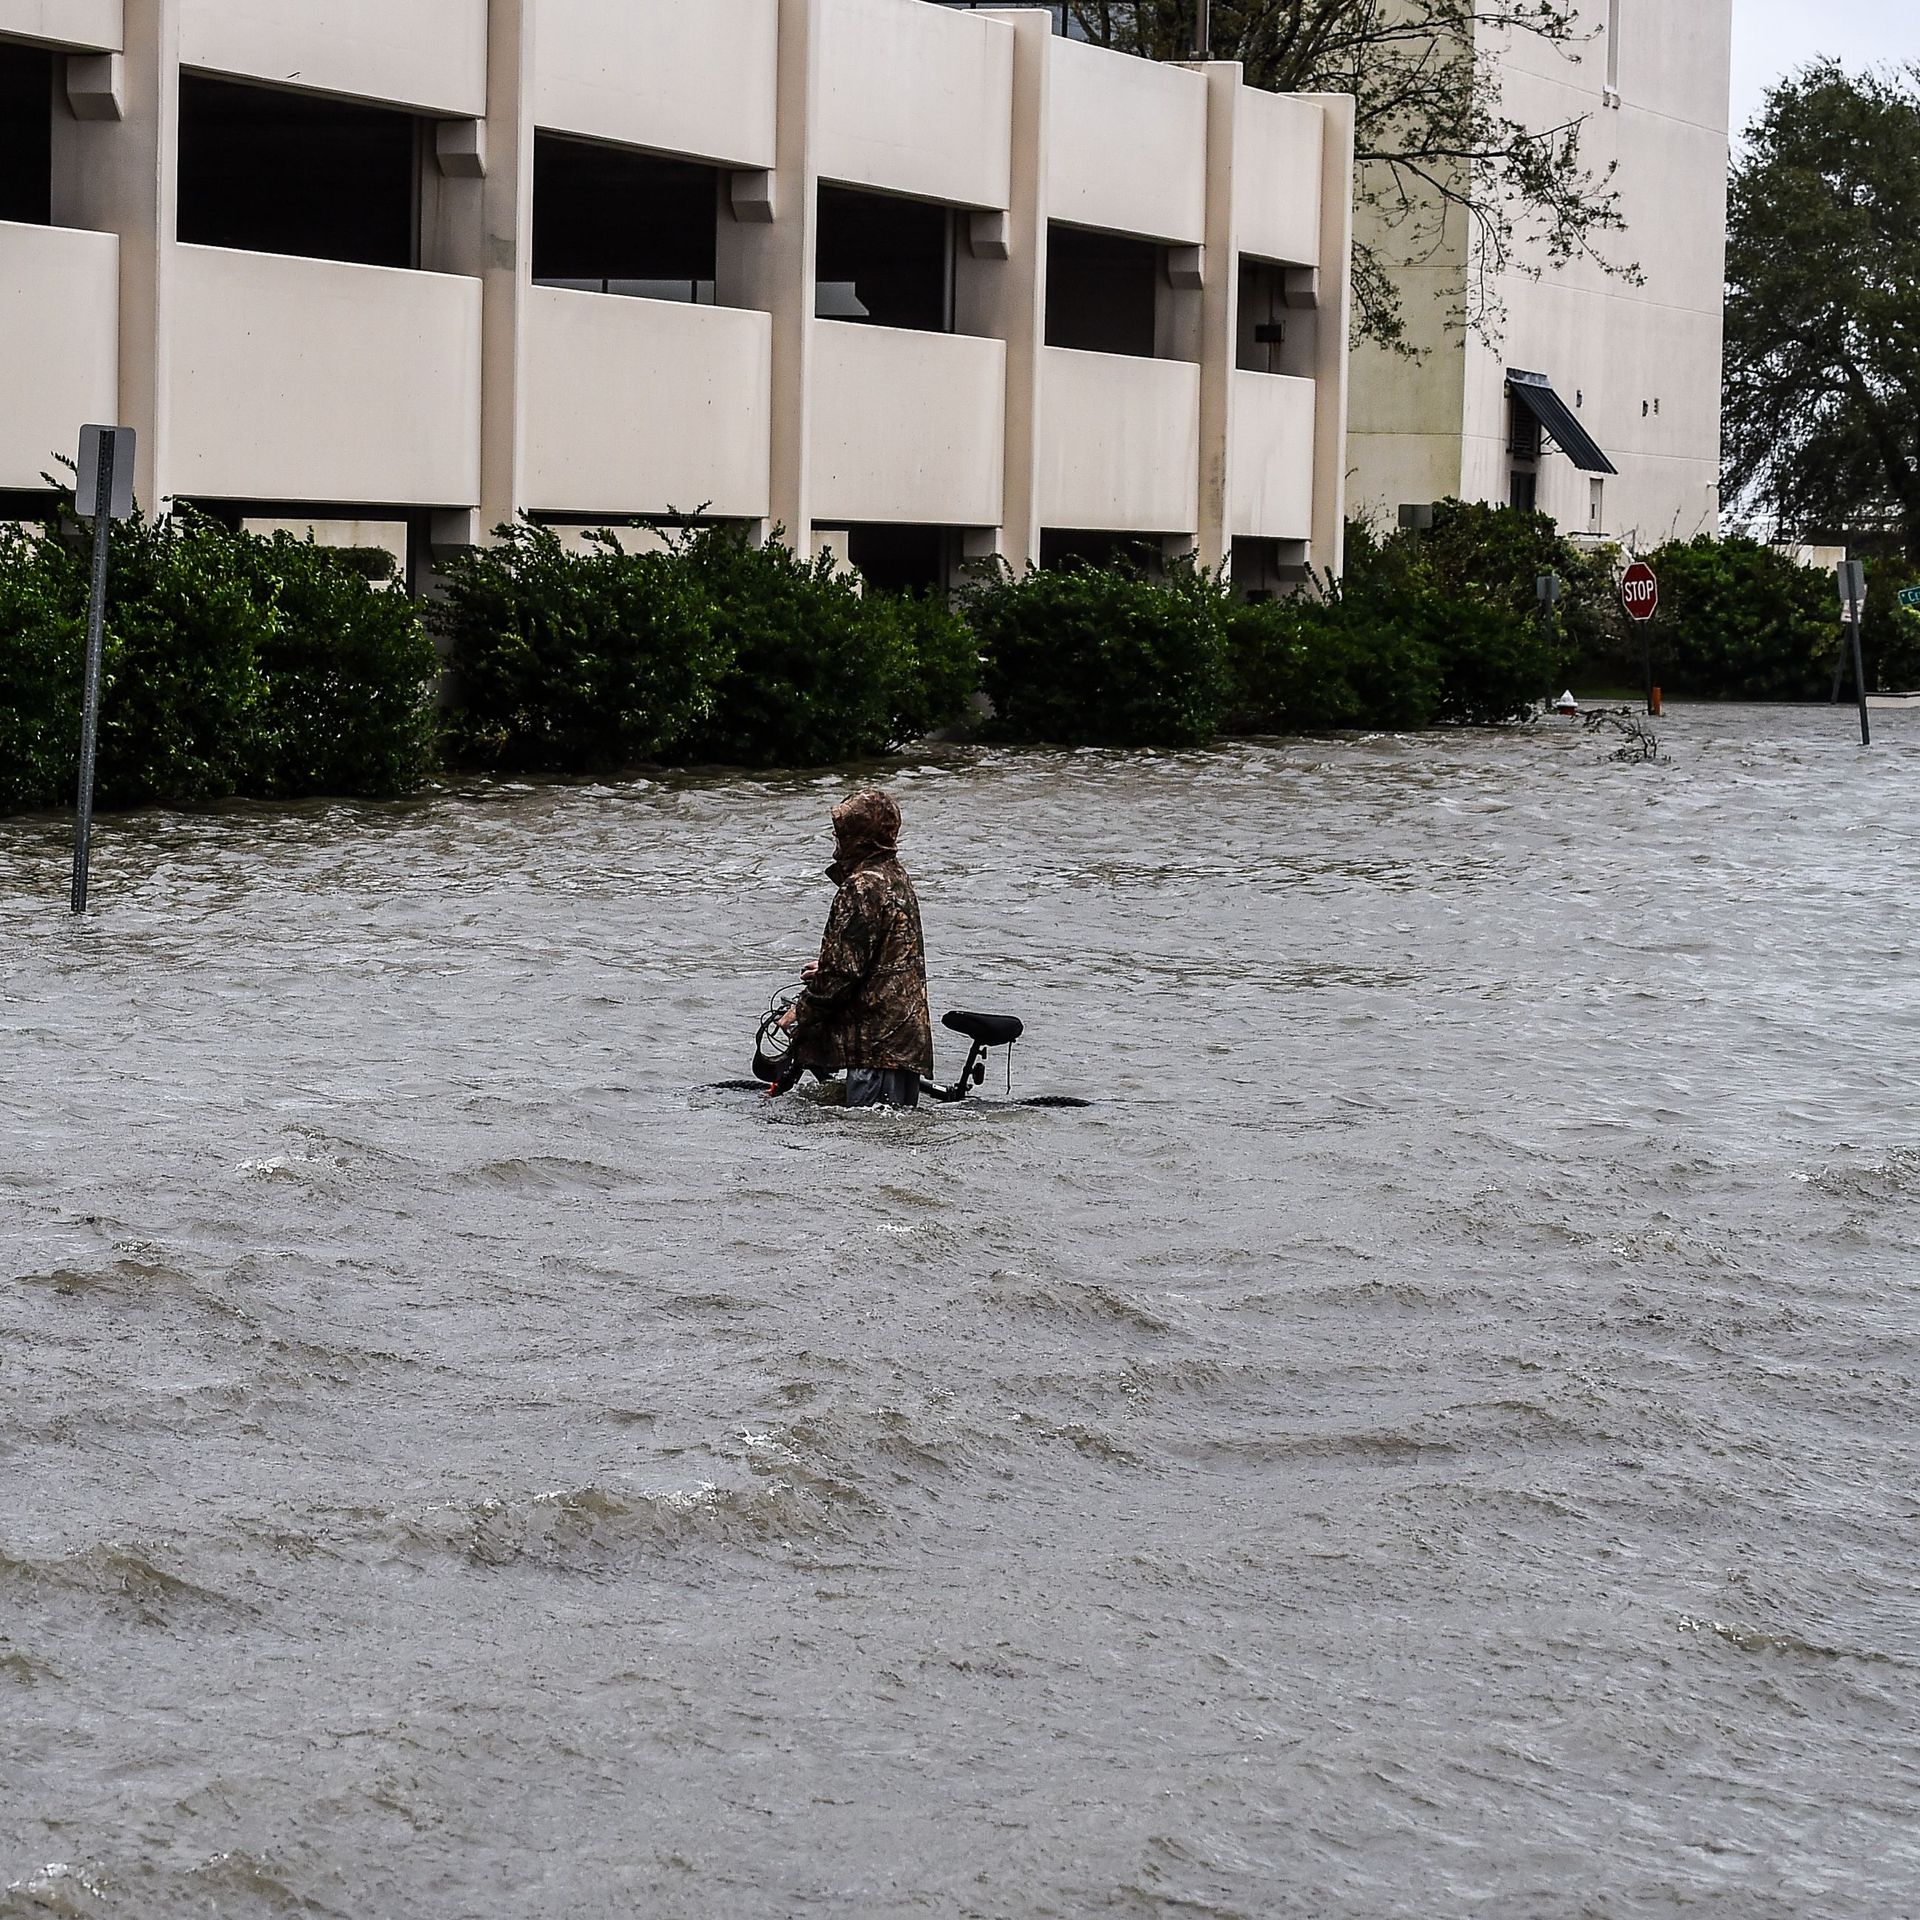 A man walks his bicycle through a street flooded by Hurricane Sally in Pensacola, Florida, on September 16